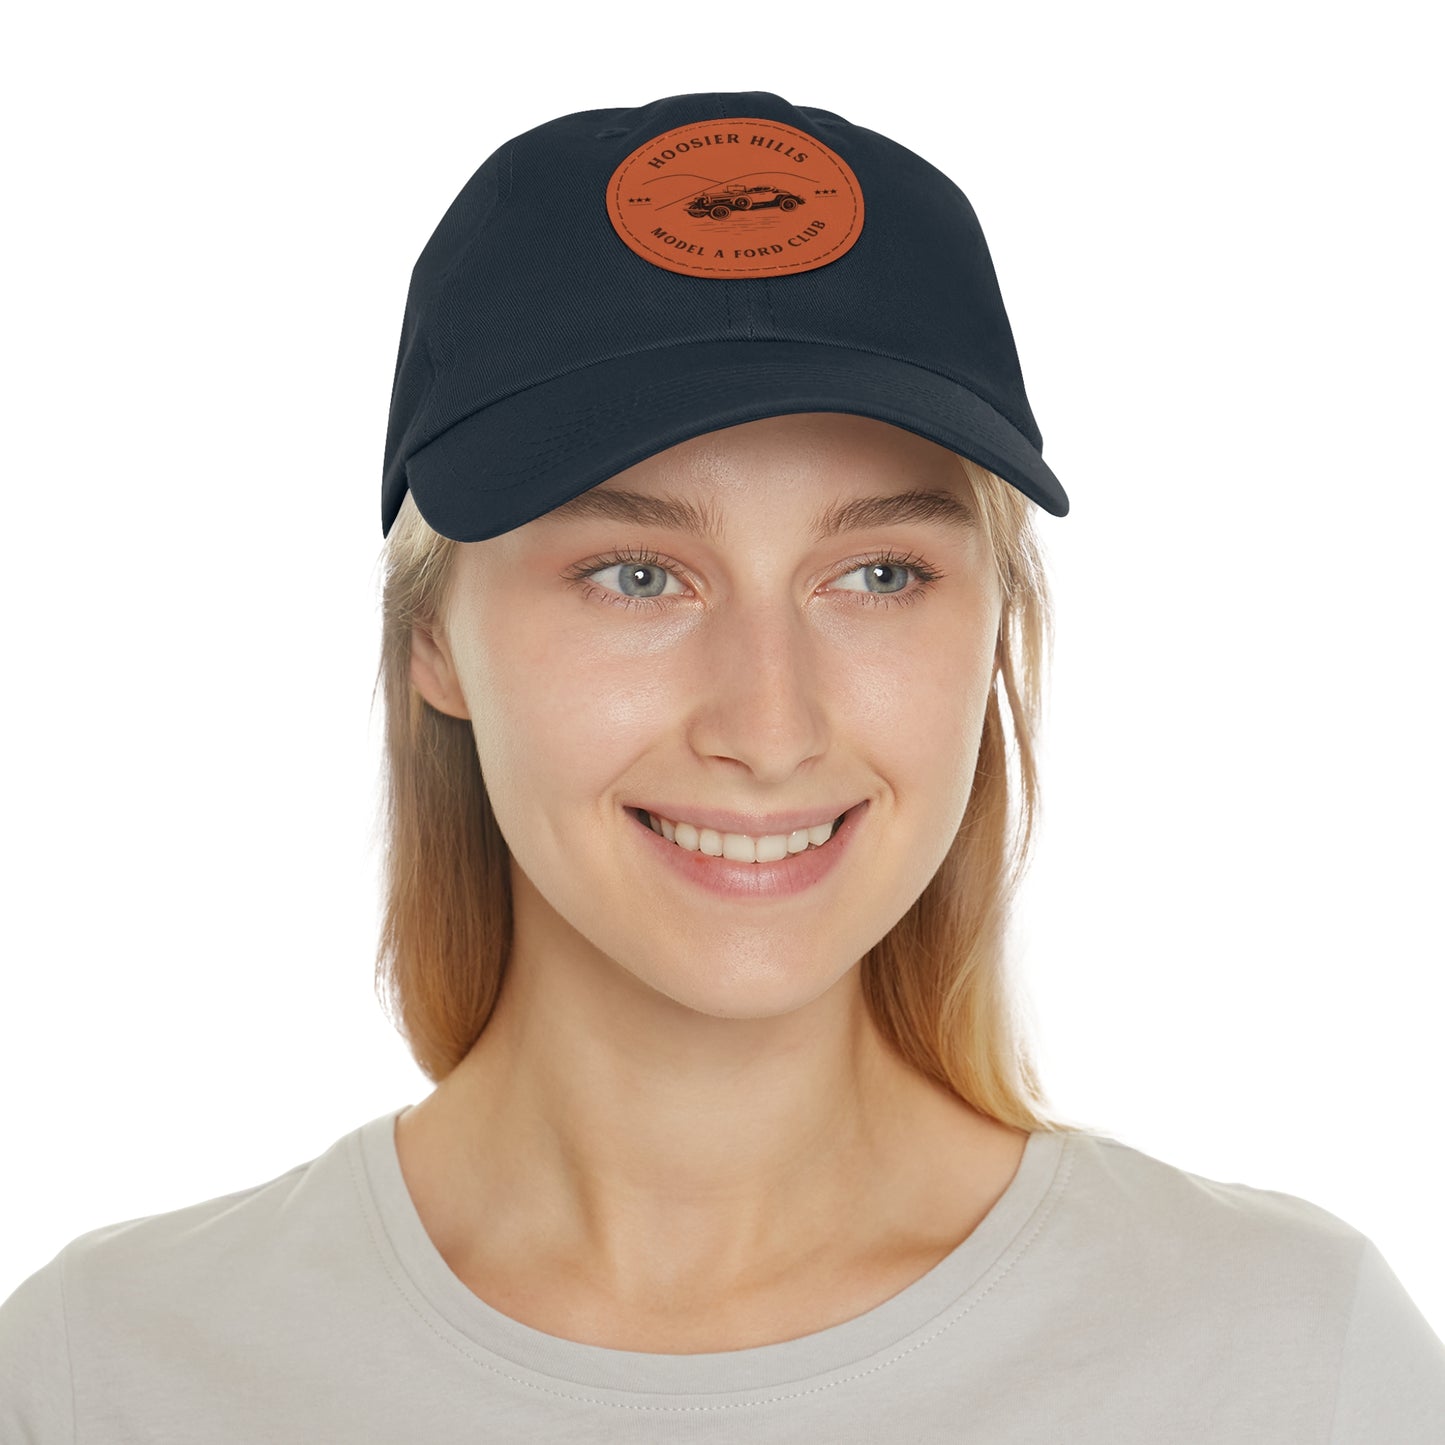 Hoosier Hill Model A Ford Club Dad Hat with Leather Patch (Round)